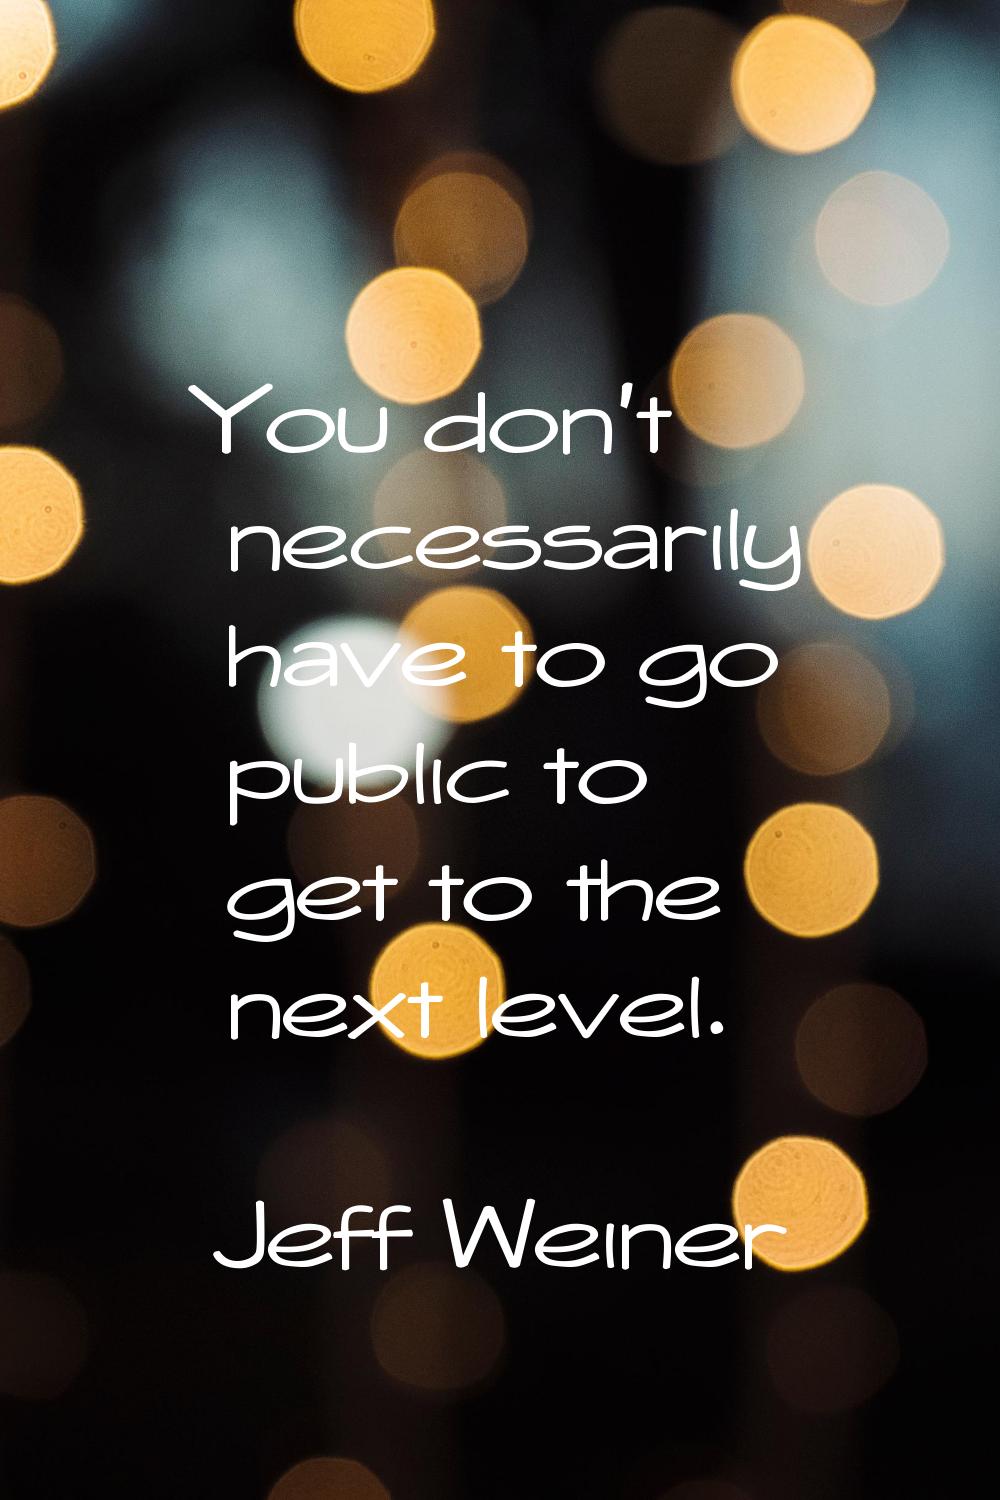 You don't necessarily have to go public to get to the next level.